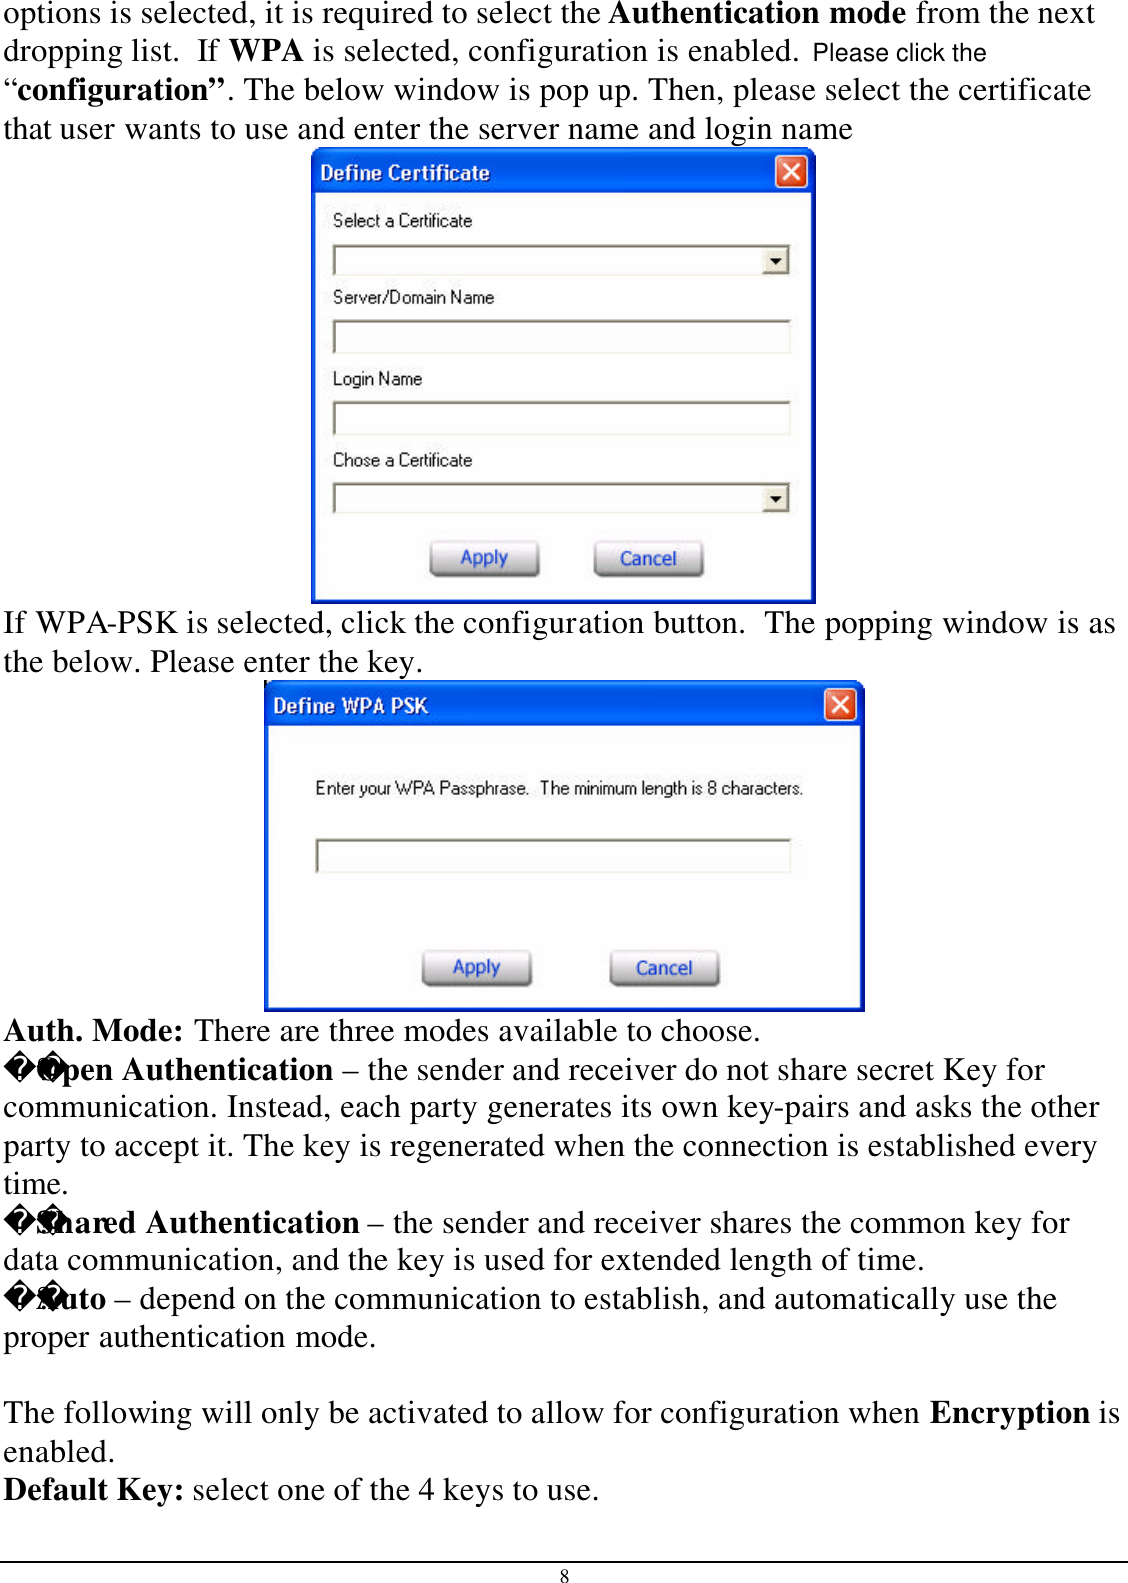 8 options is selected, it is required to select the Authentication mode from the next dropping list.  If WPA is selected, configuration is enabled.  Please click the “configuration”. The below window is pop up. Then, please select the certificate that user wants to use and enter the server name and login name  If WPA-PSK is selected, click the configuration button.  The popping window is as the below. Please enter the key.  Auth. Mode: There are three modes available to choose. ??Open Authentication – the sender and receiver do not share secret Key for communication. Instead, each party generates its own key-pairs and asks the other party to accept it. The key is regenerated when the connection is established every time. ??Shared Authentication – the sender and receiver shares the common key for data communication, and the key is used for extended length of time. ??Auto – depend on the communication to establish, and automatically use the proper authentication mode.  The following will only be activated to allow for configuration when Encryption is enabled. Default Key: select one of the 4 keys to use. 